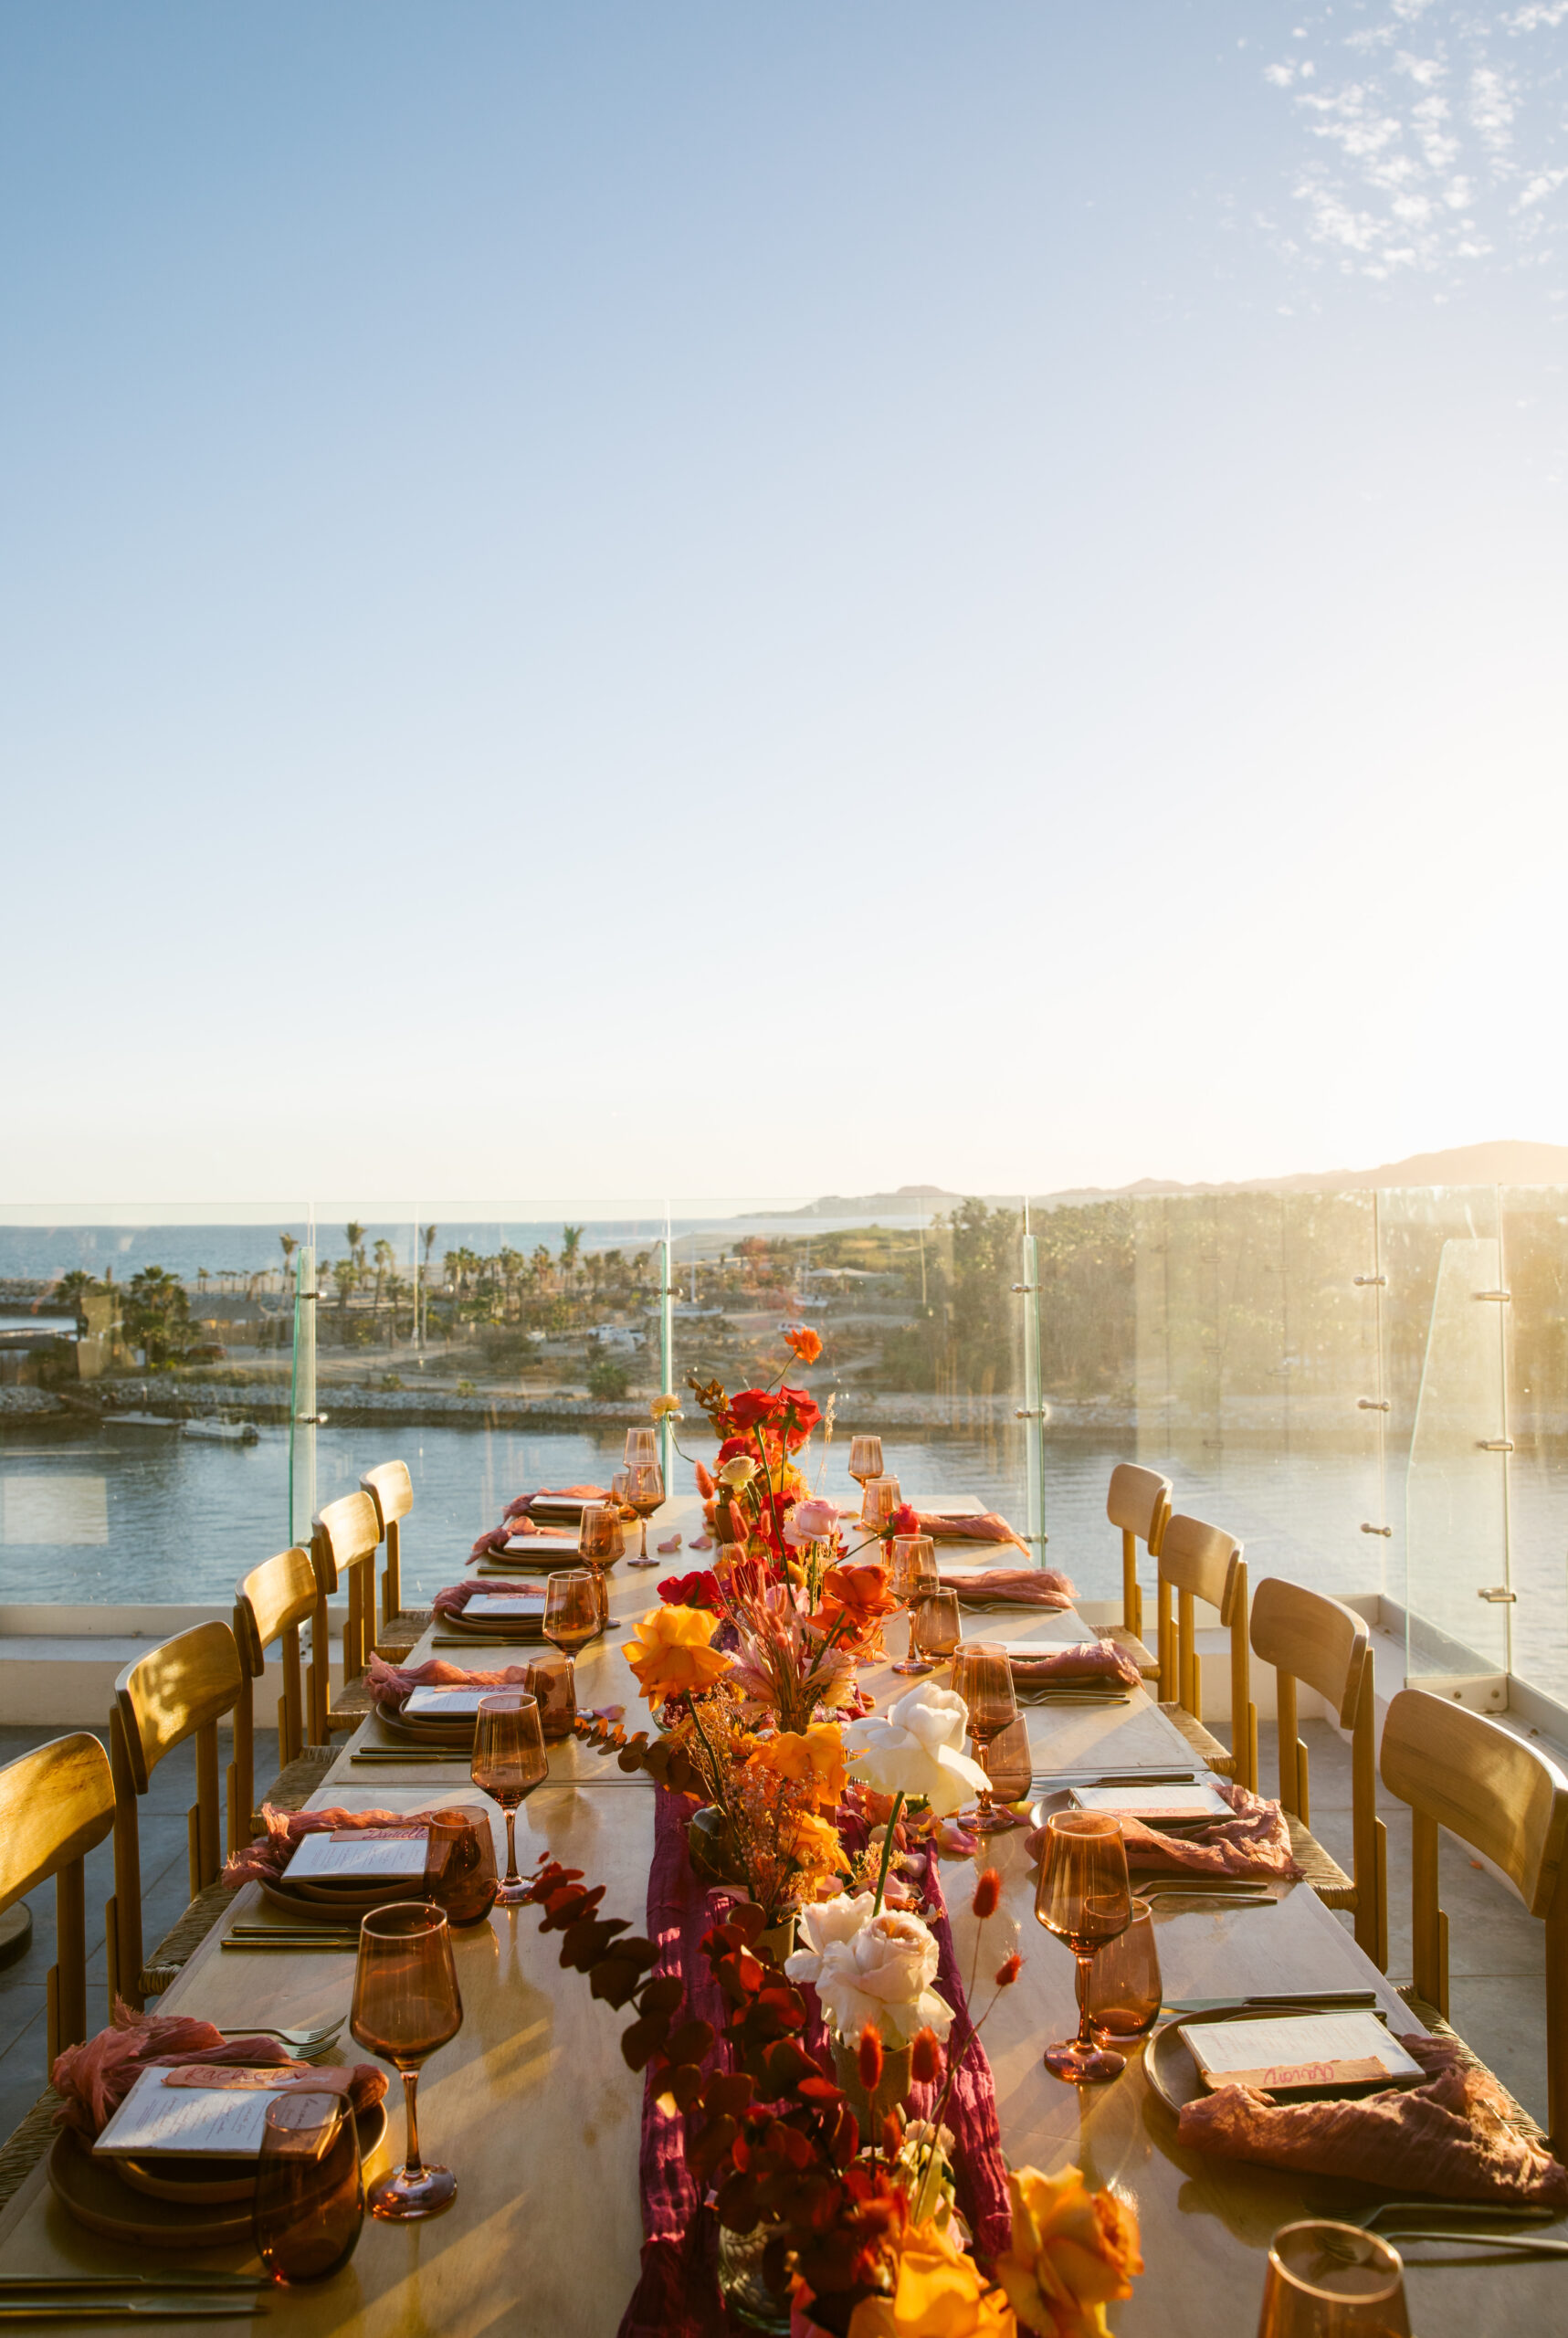 hotel el ganzo rooftop. colorful wedding florals. bright pinks, red, orange, yellow. fuchsia gauze runner on light wooden table with wooden chairs. smokey pink colored glassware. wedding reception tabletop. 
orange and pink custom table number signs. 
blue skies. ocean view. rooftop wedding dinner reception. mauve clay handmade plates. gold flatware